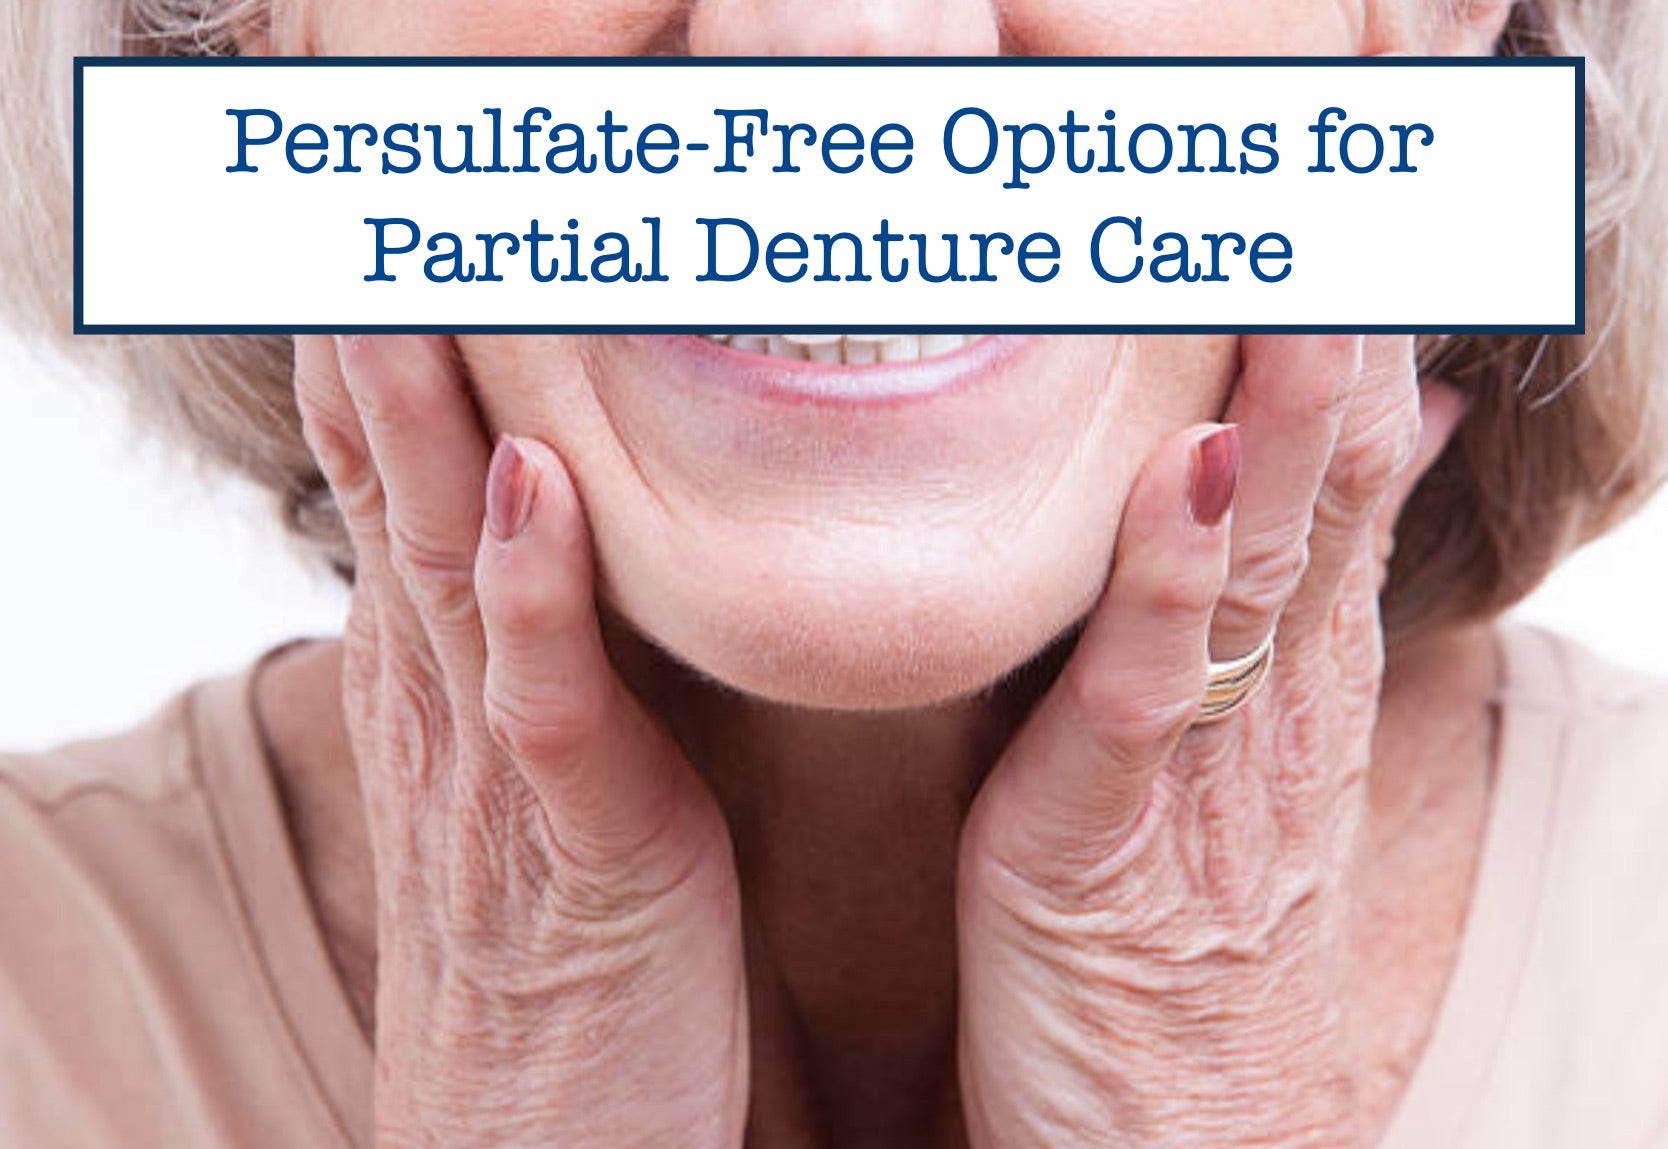 Persulfate-Free Options for Partial Denture Care